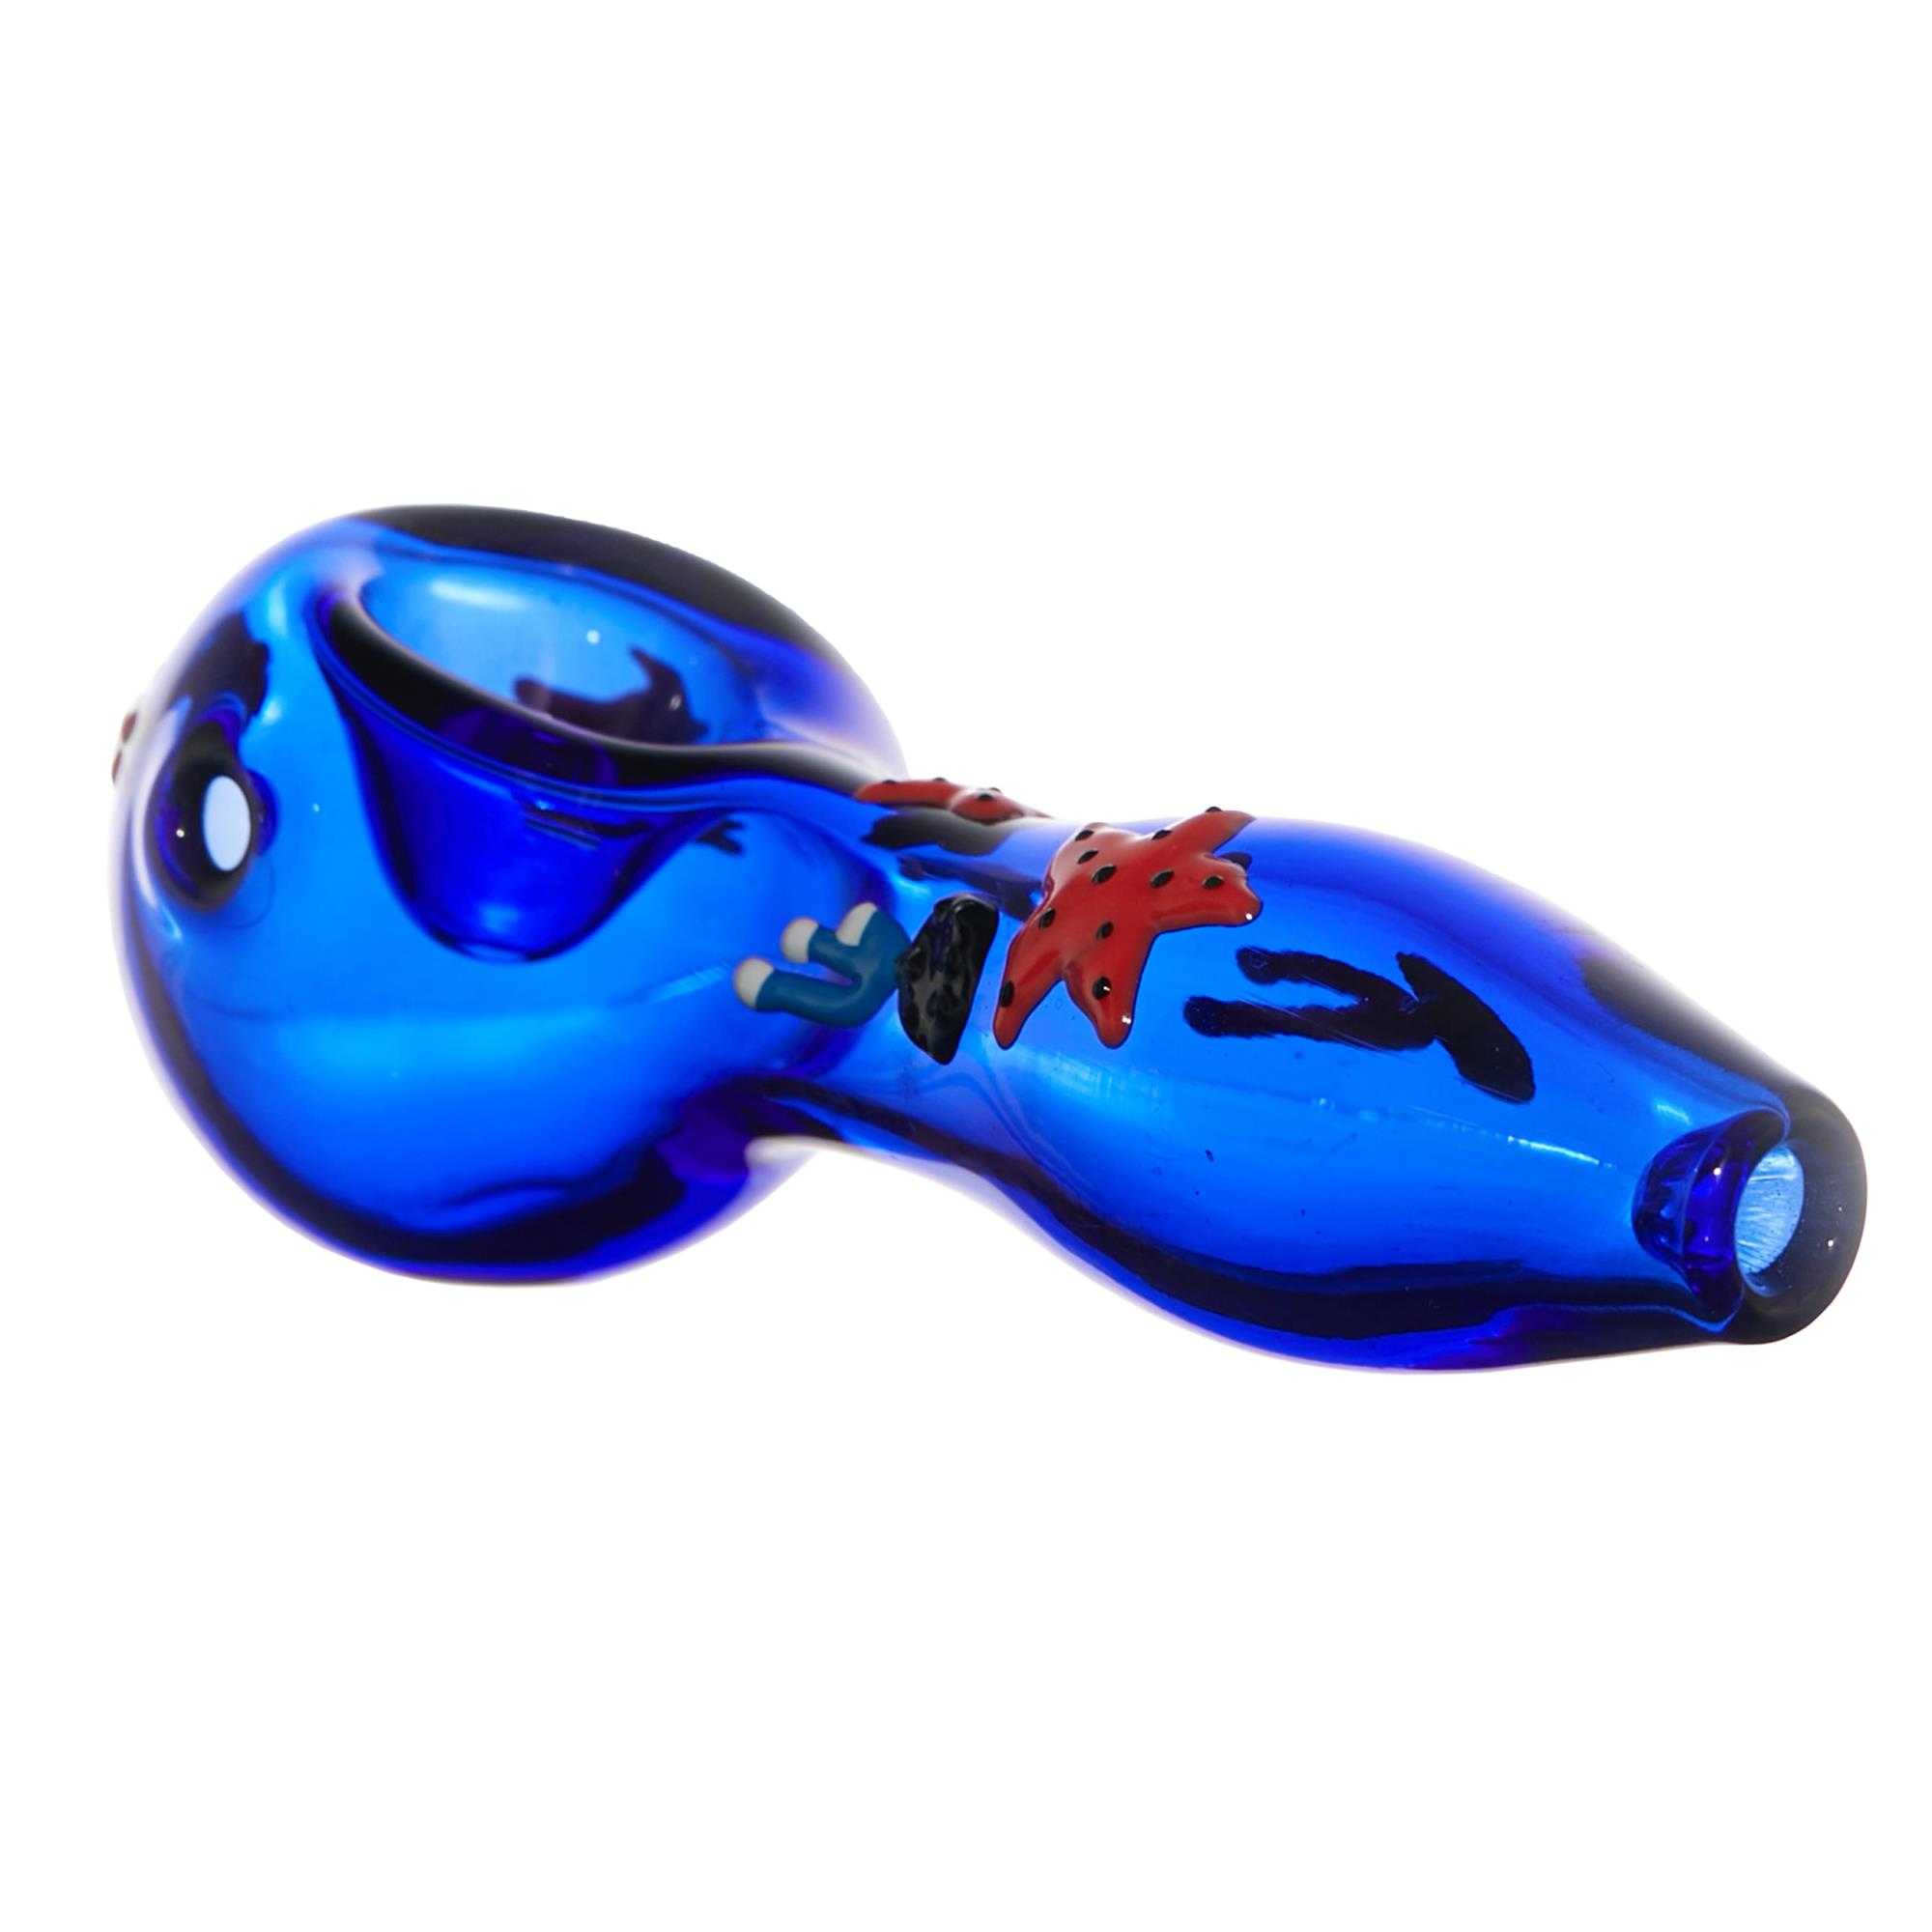 BLUE AND RED STARFISH SPOON PIPE